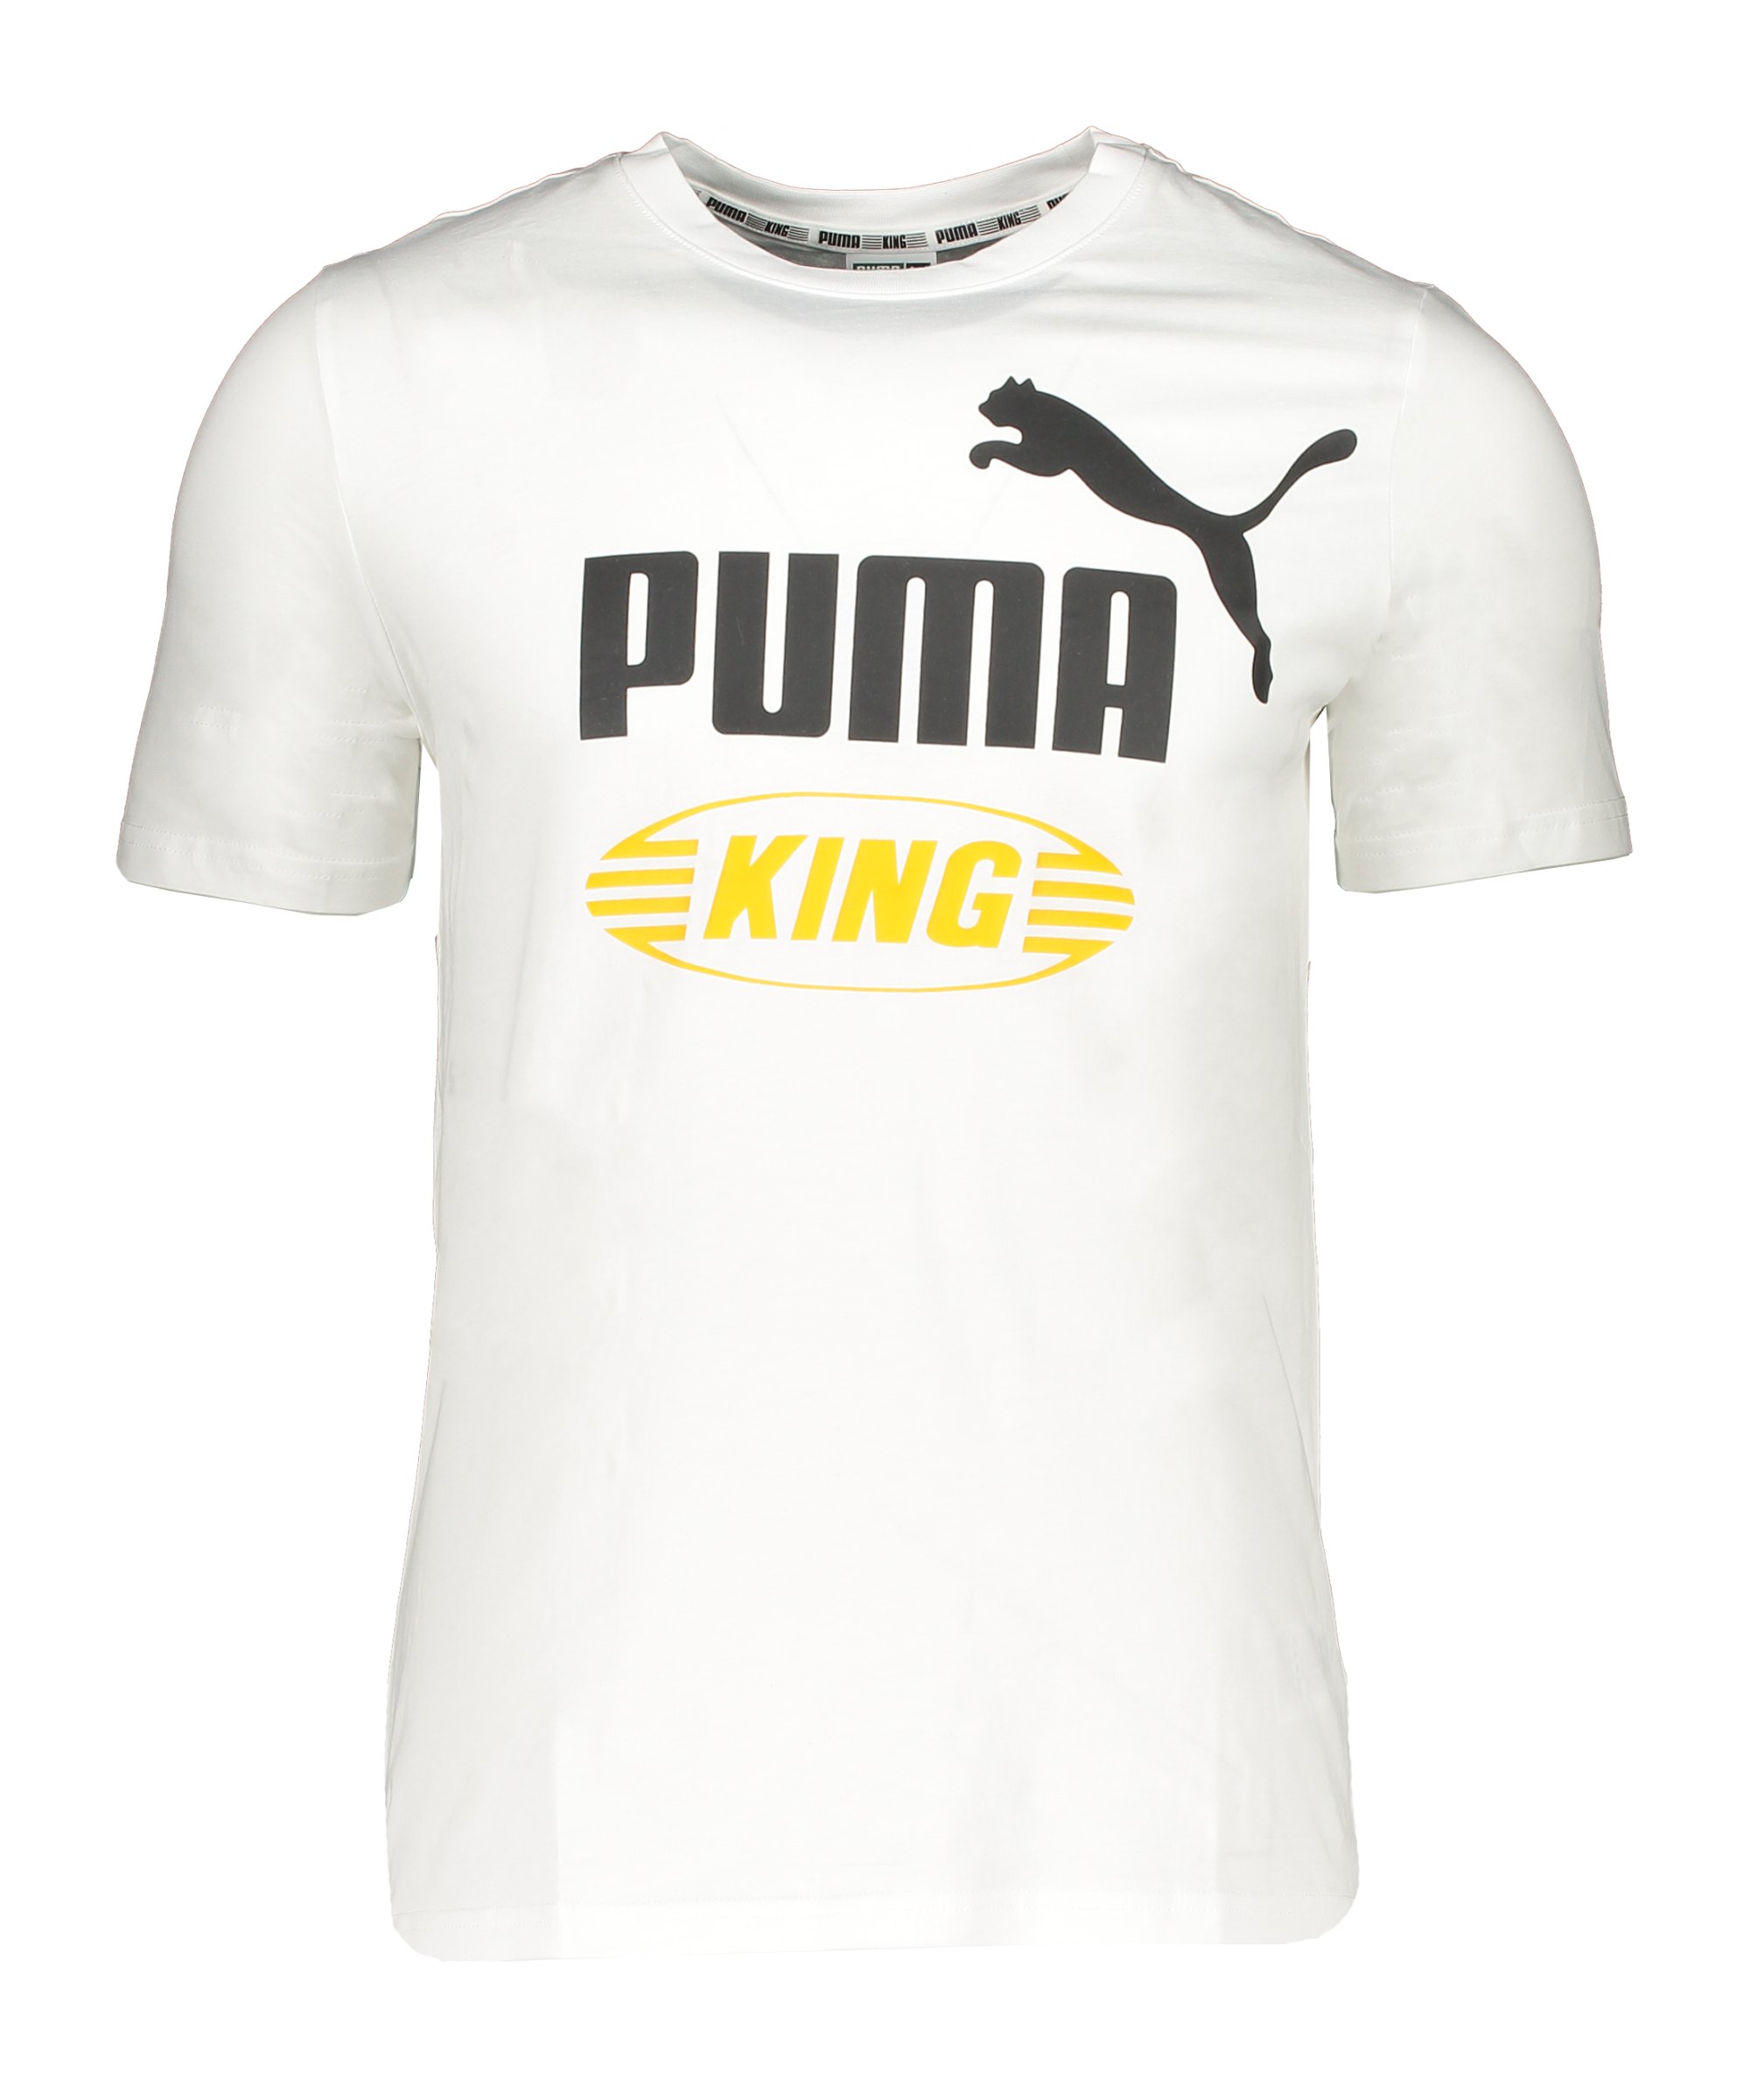 PUMA Iconic KING T-Shirt Weiss F02 - weiss